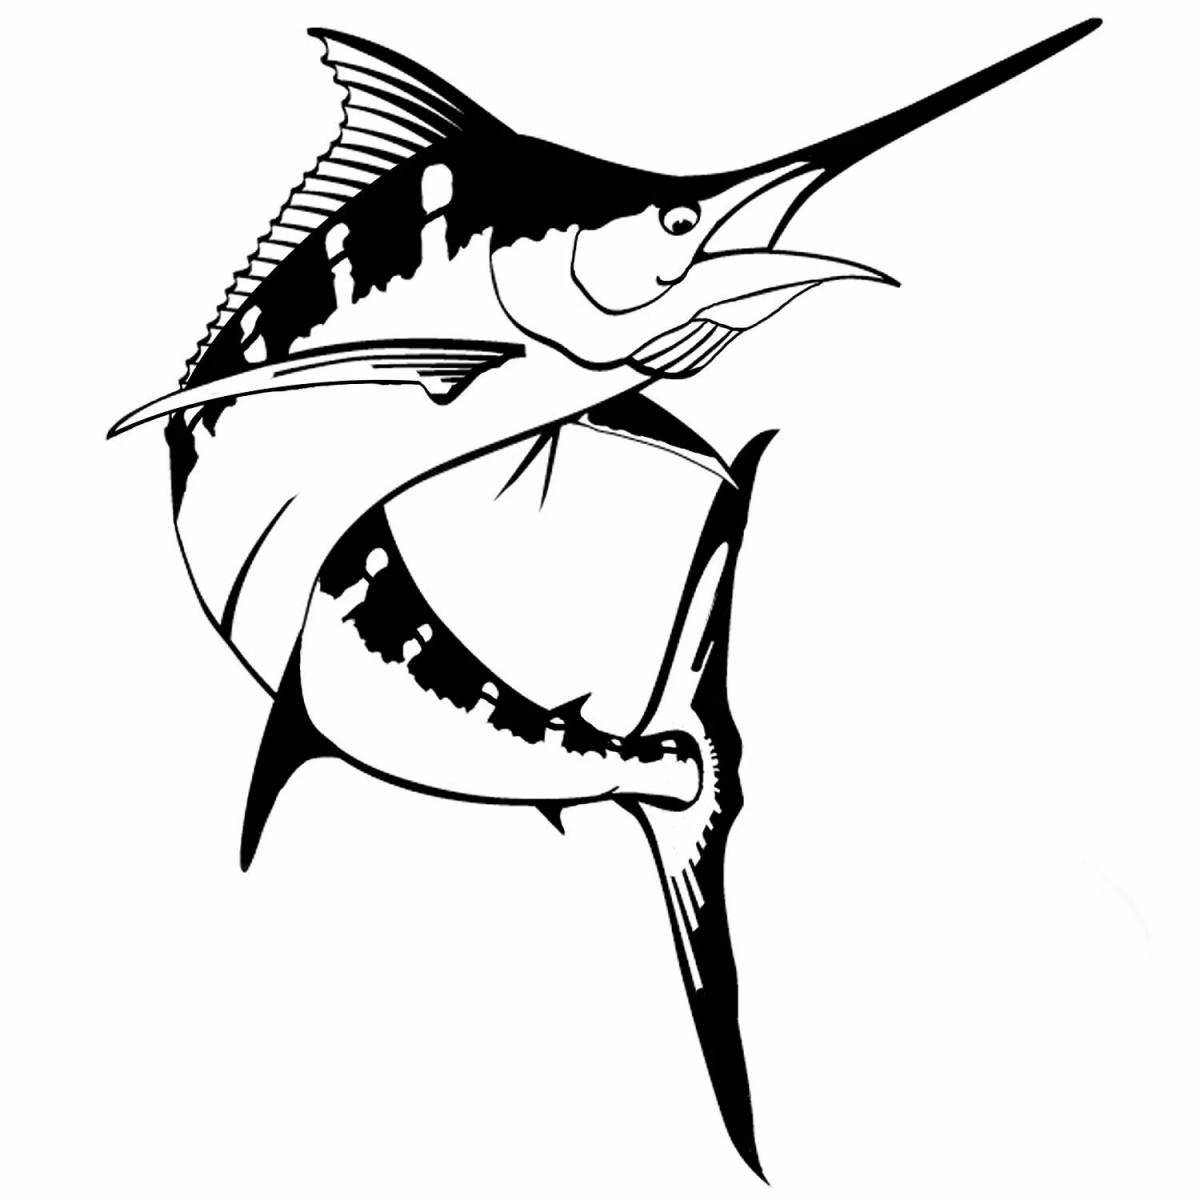 Coloring book gorgeous marlin fish